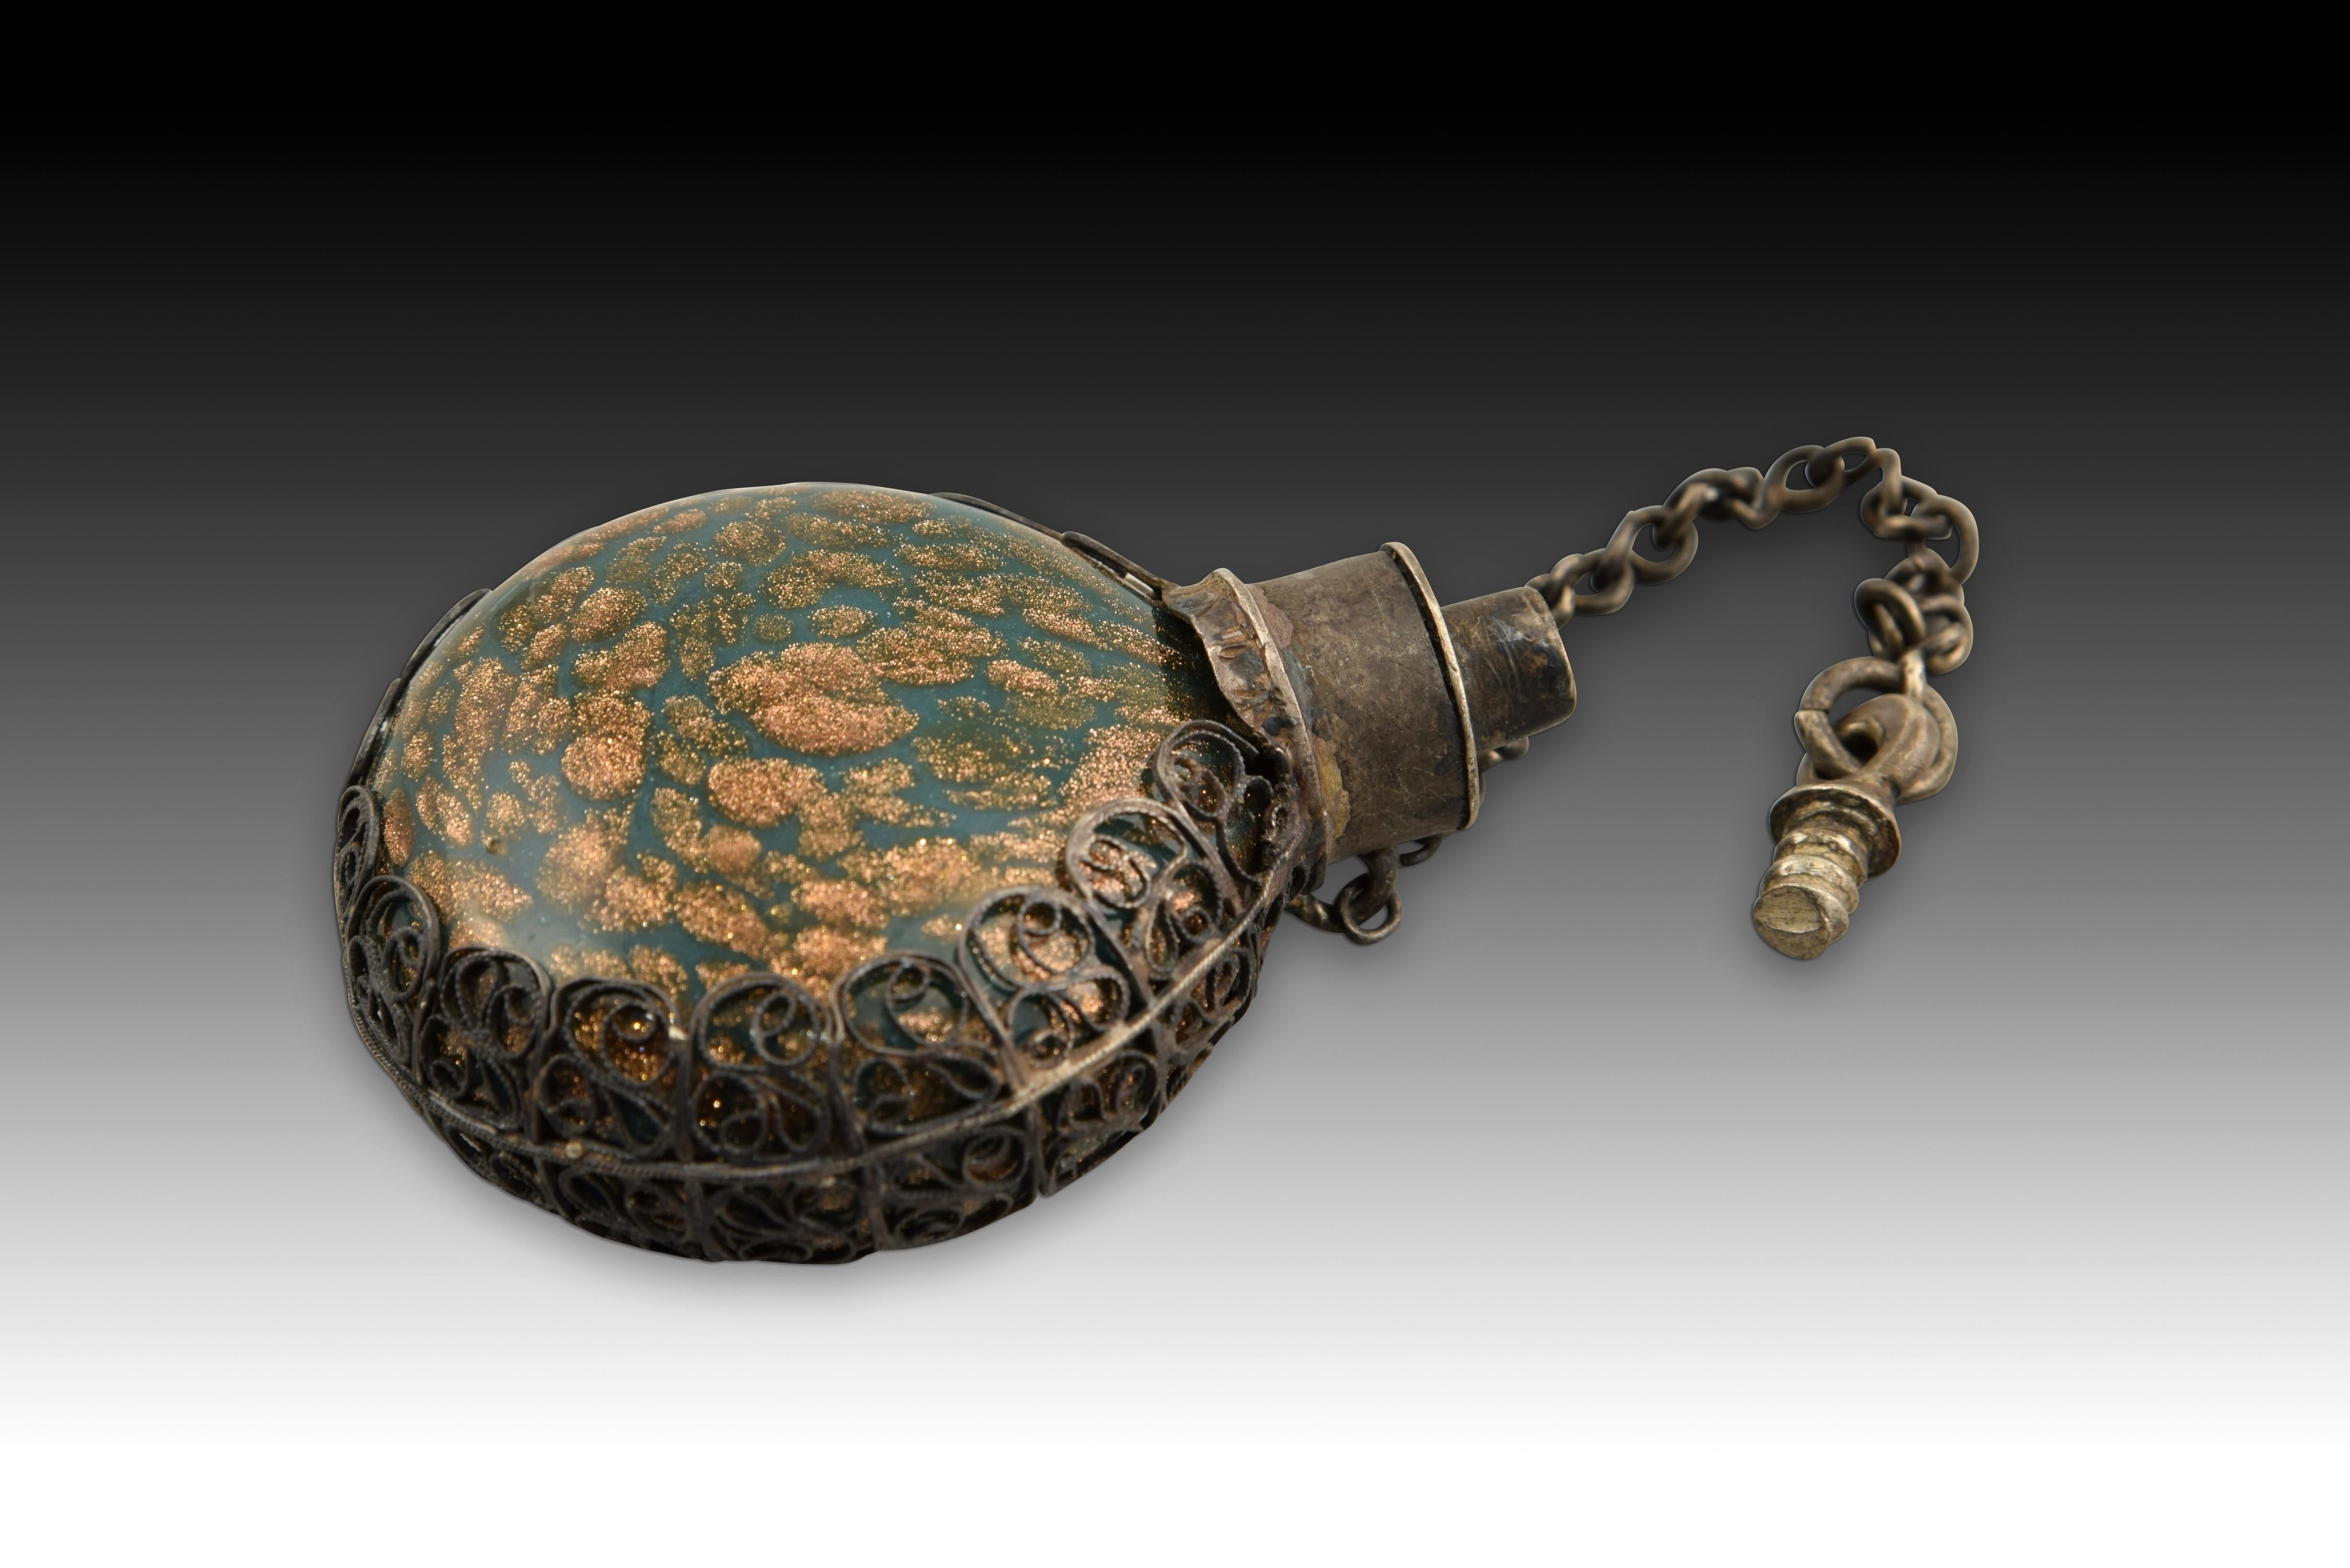 European Aventurine Glass and Silver Perfume Bottle, Possibly Venetia and Others, 17th C